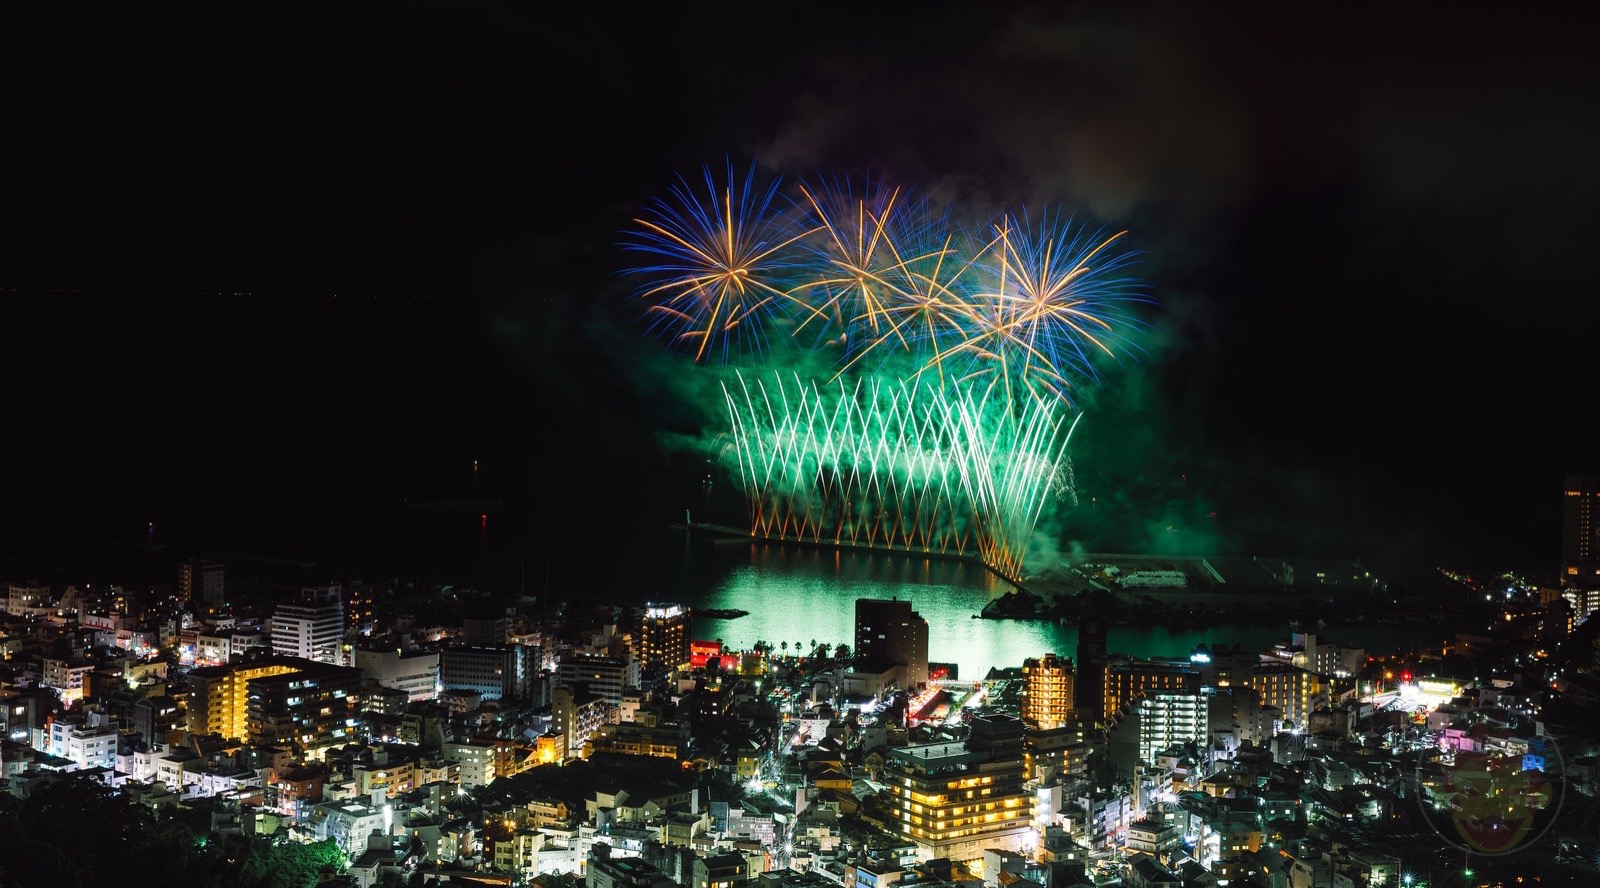 The-View-from-Risonale-Atami-Fireworks-01.jpg